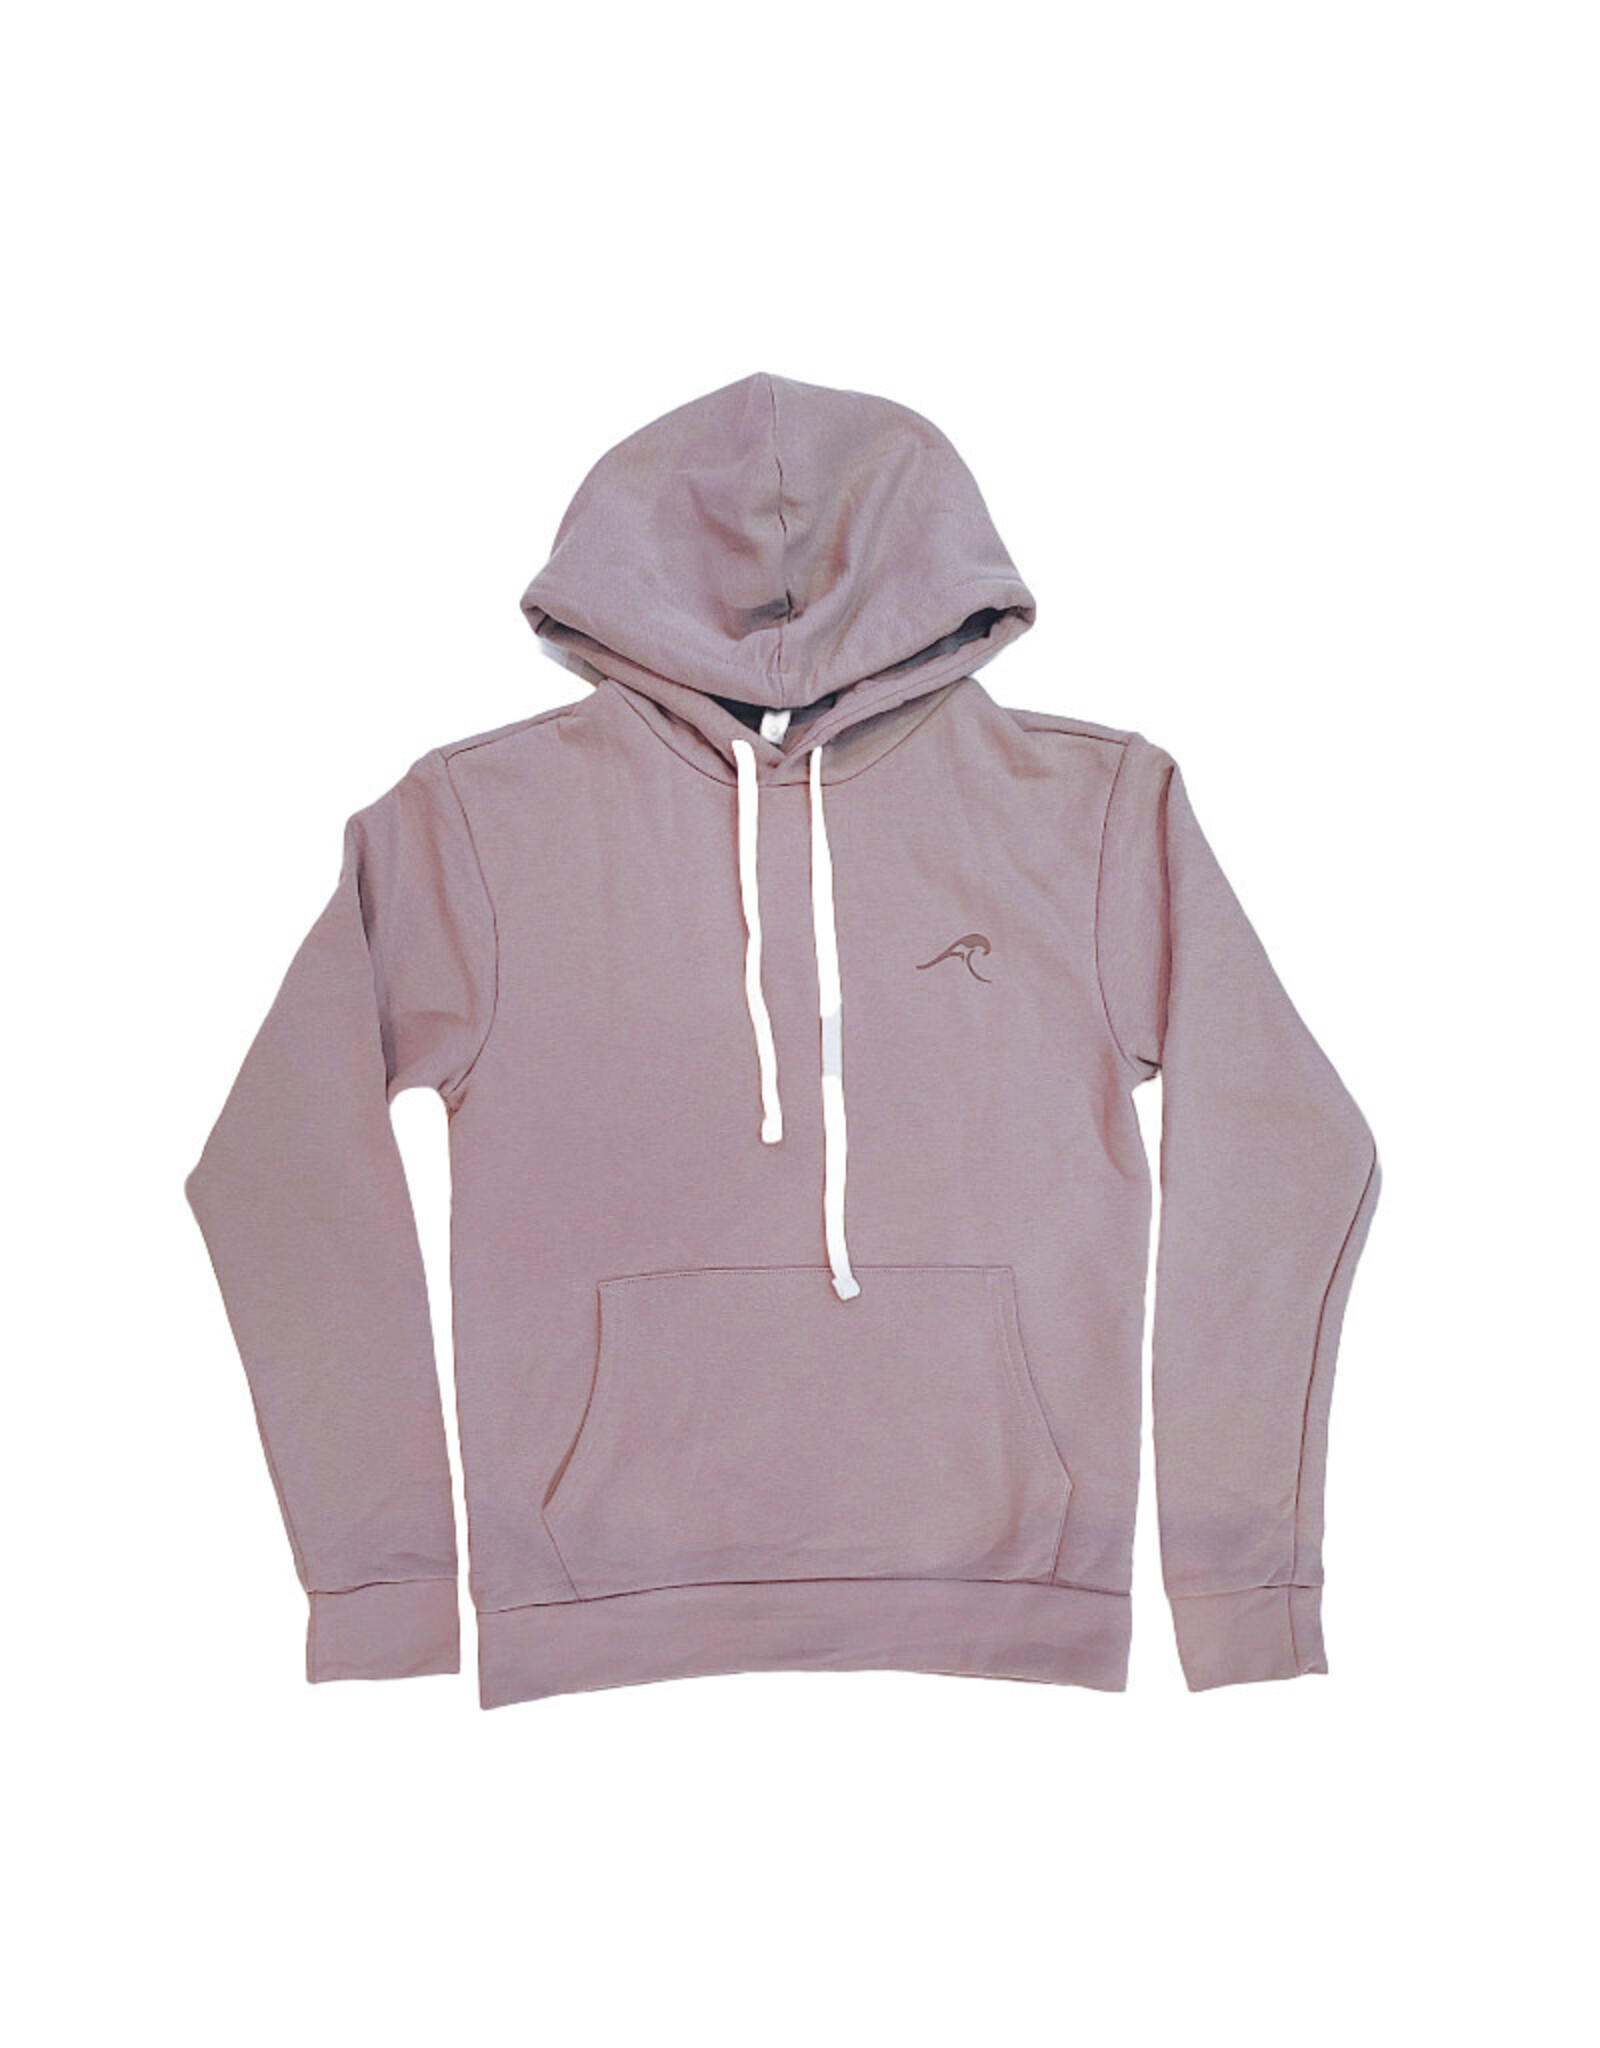 Atlantic Surf Co Atlantic Surf Wave Icon Hoodie Oyster